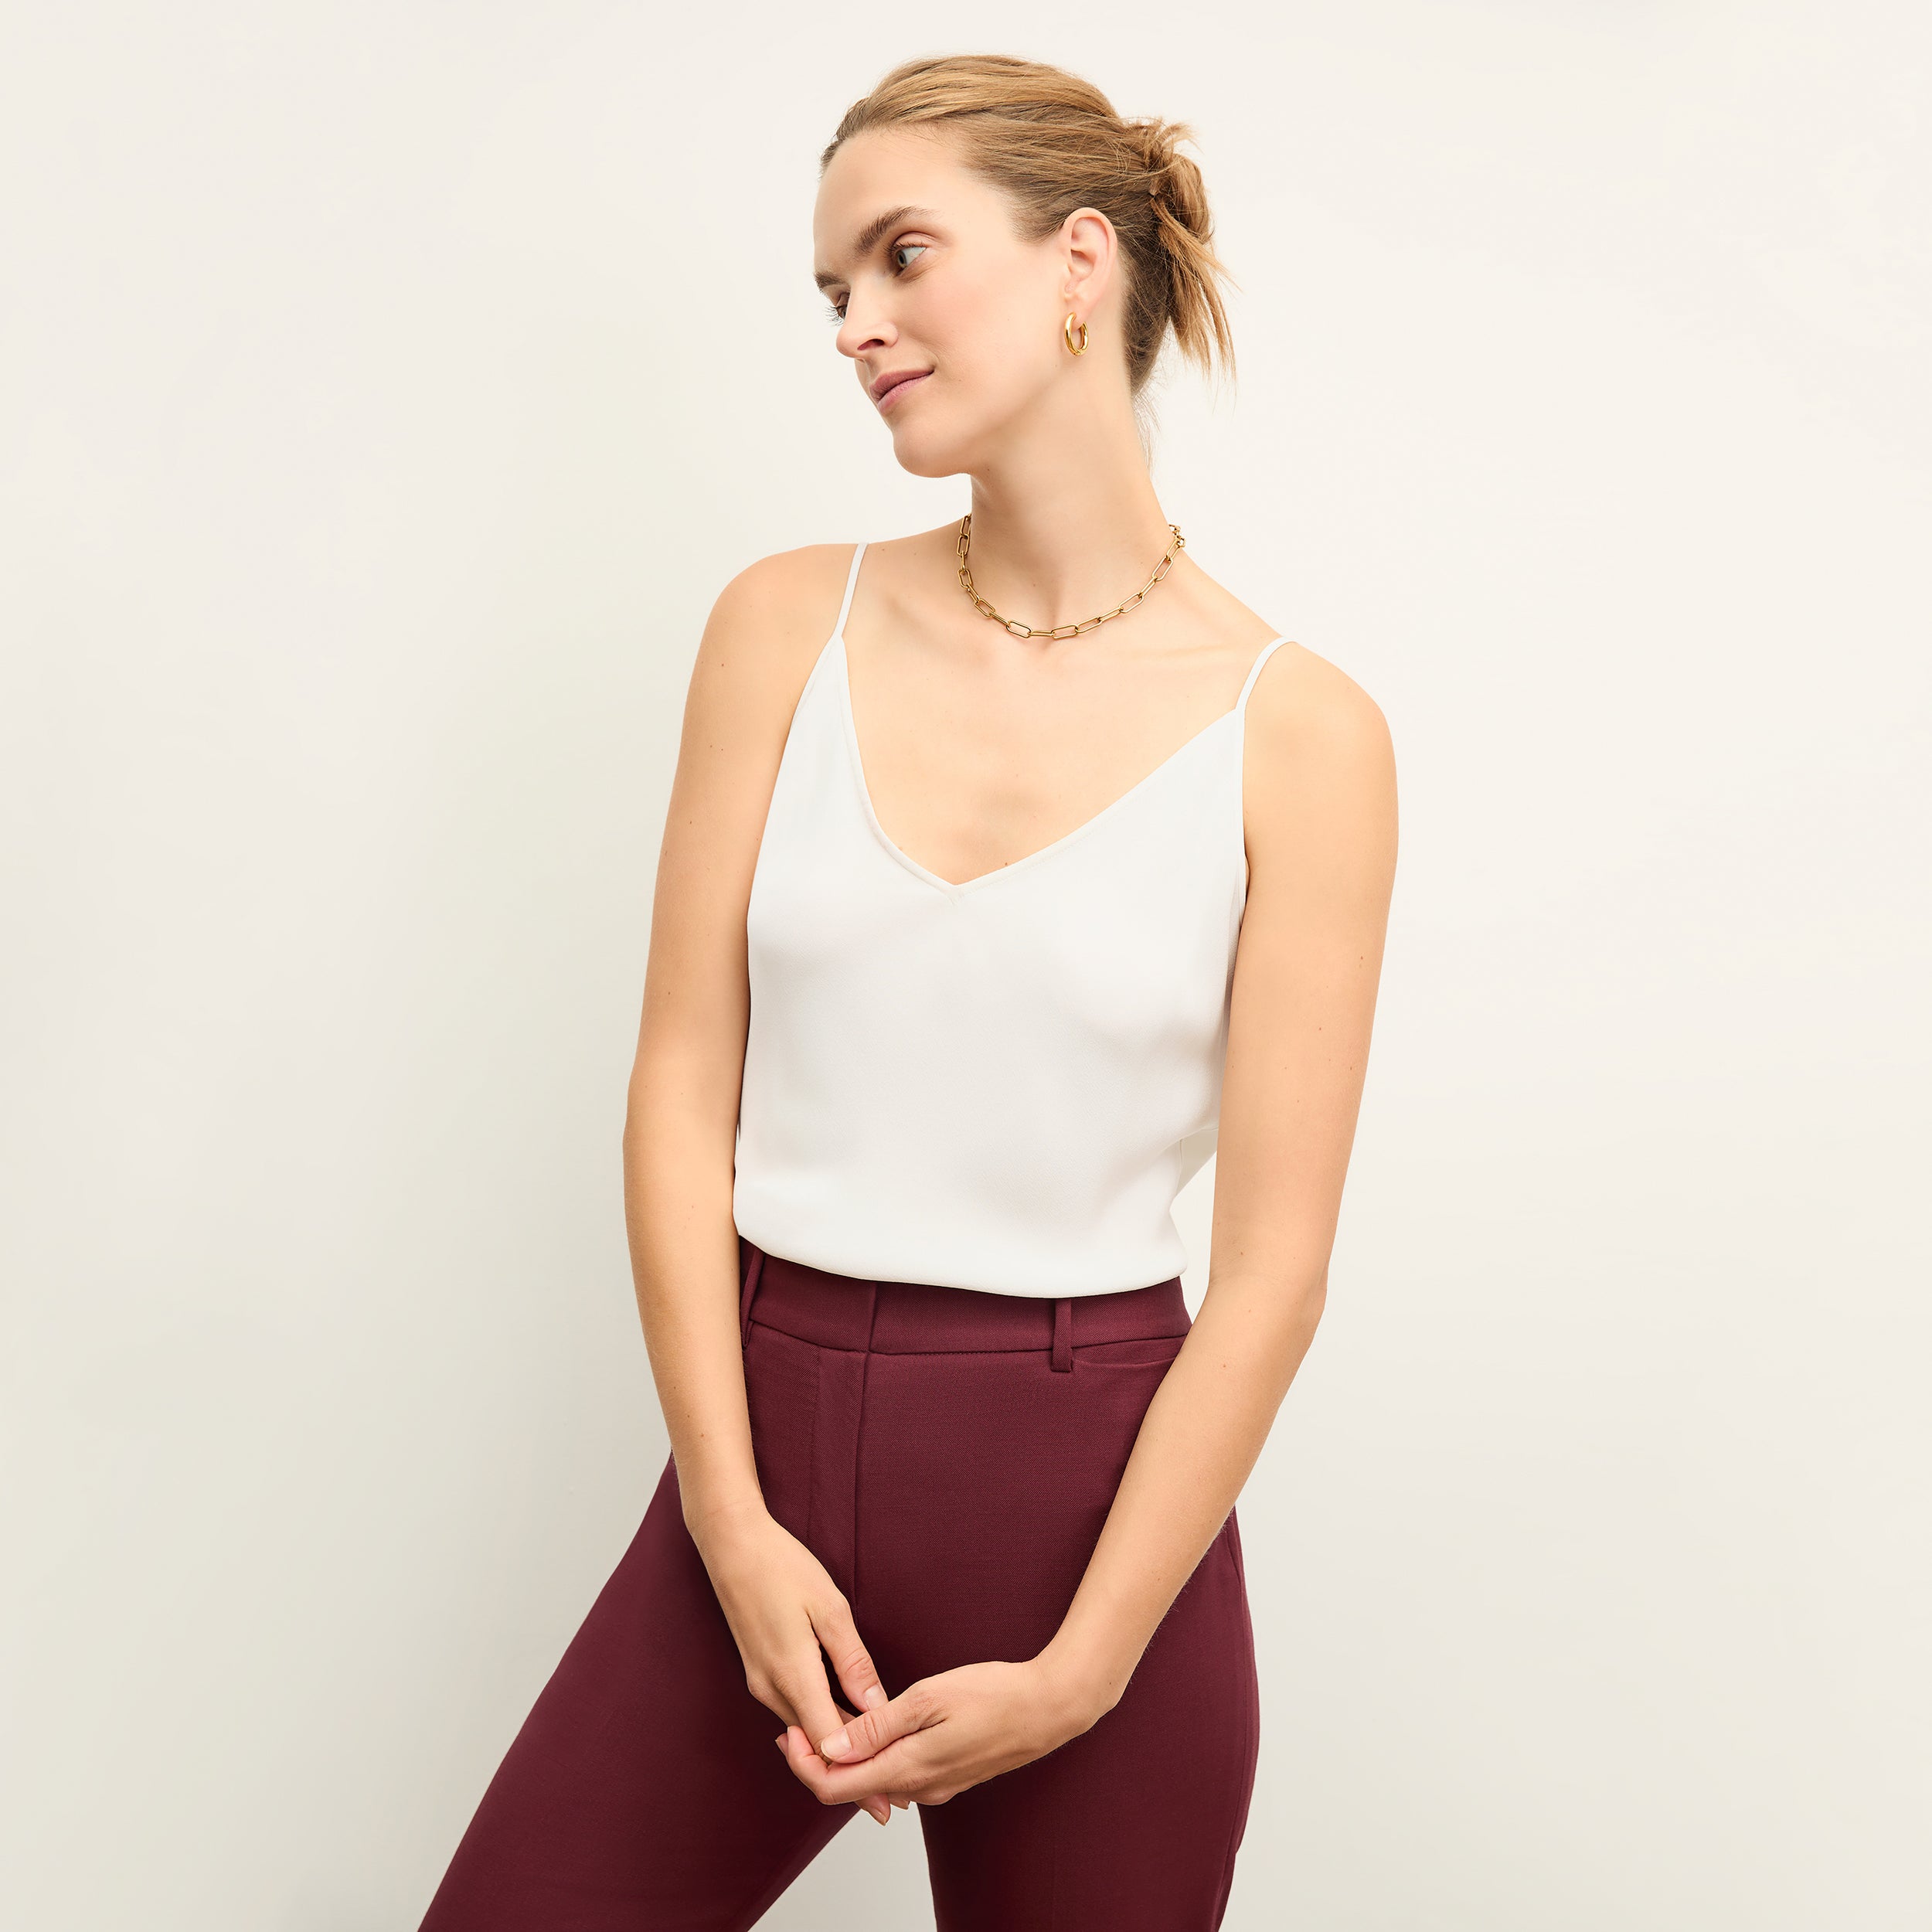 CAMI NYC V-Neck Camisoles for Women